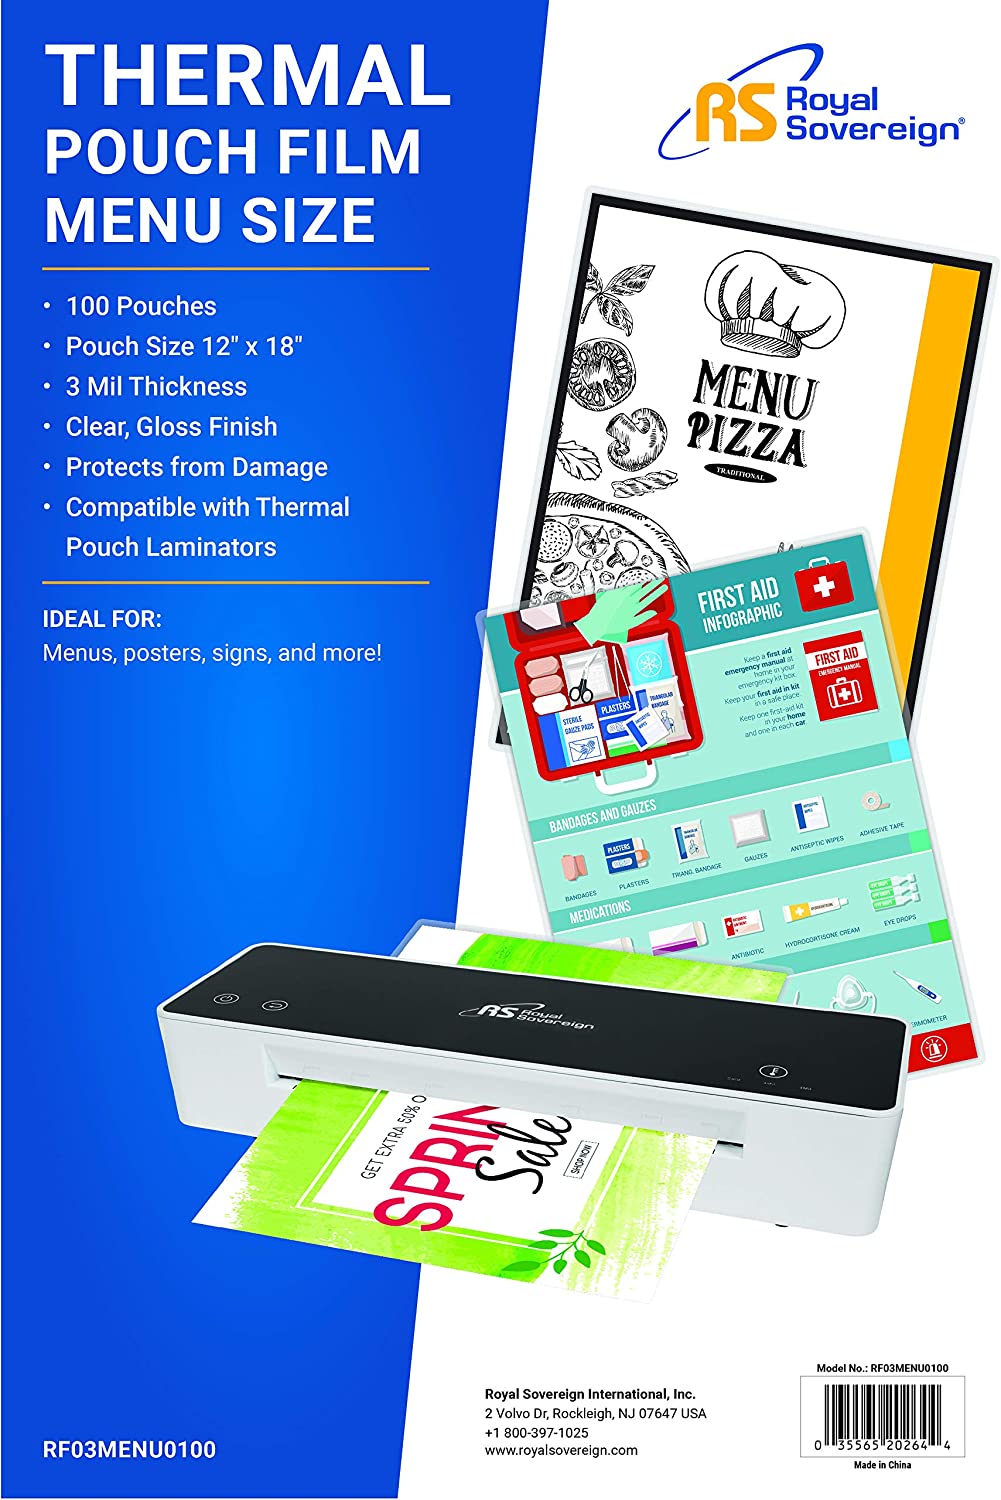 Royal Sovereign 3 Mil Thermal Laminating Pouches, 100 Pack, Menu Size, 18" x 12" x 0.6" Inches, Clear Gloss (RF03MENU0100)